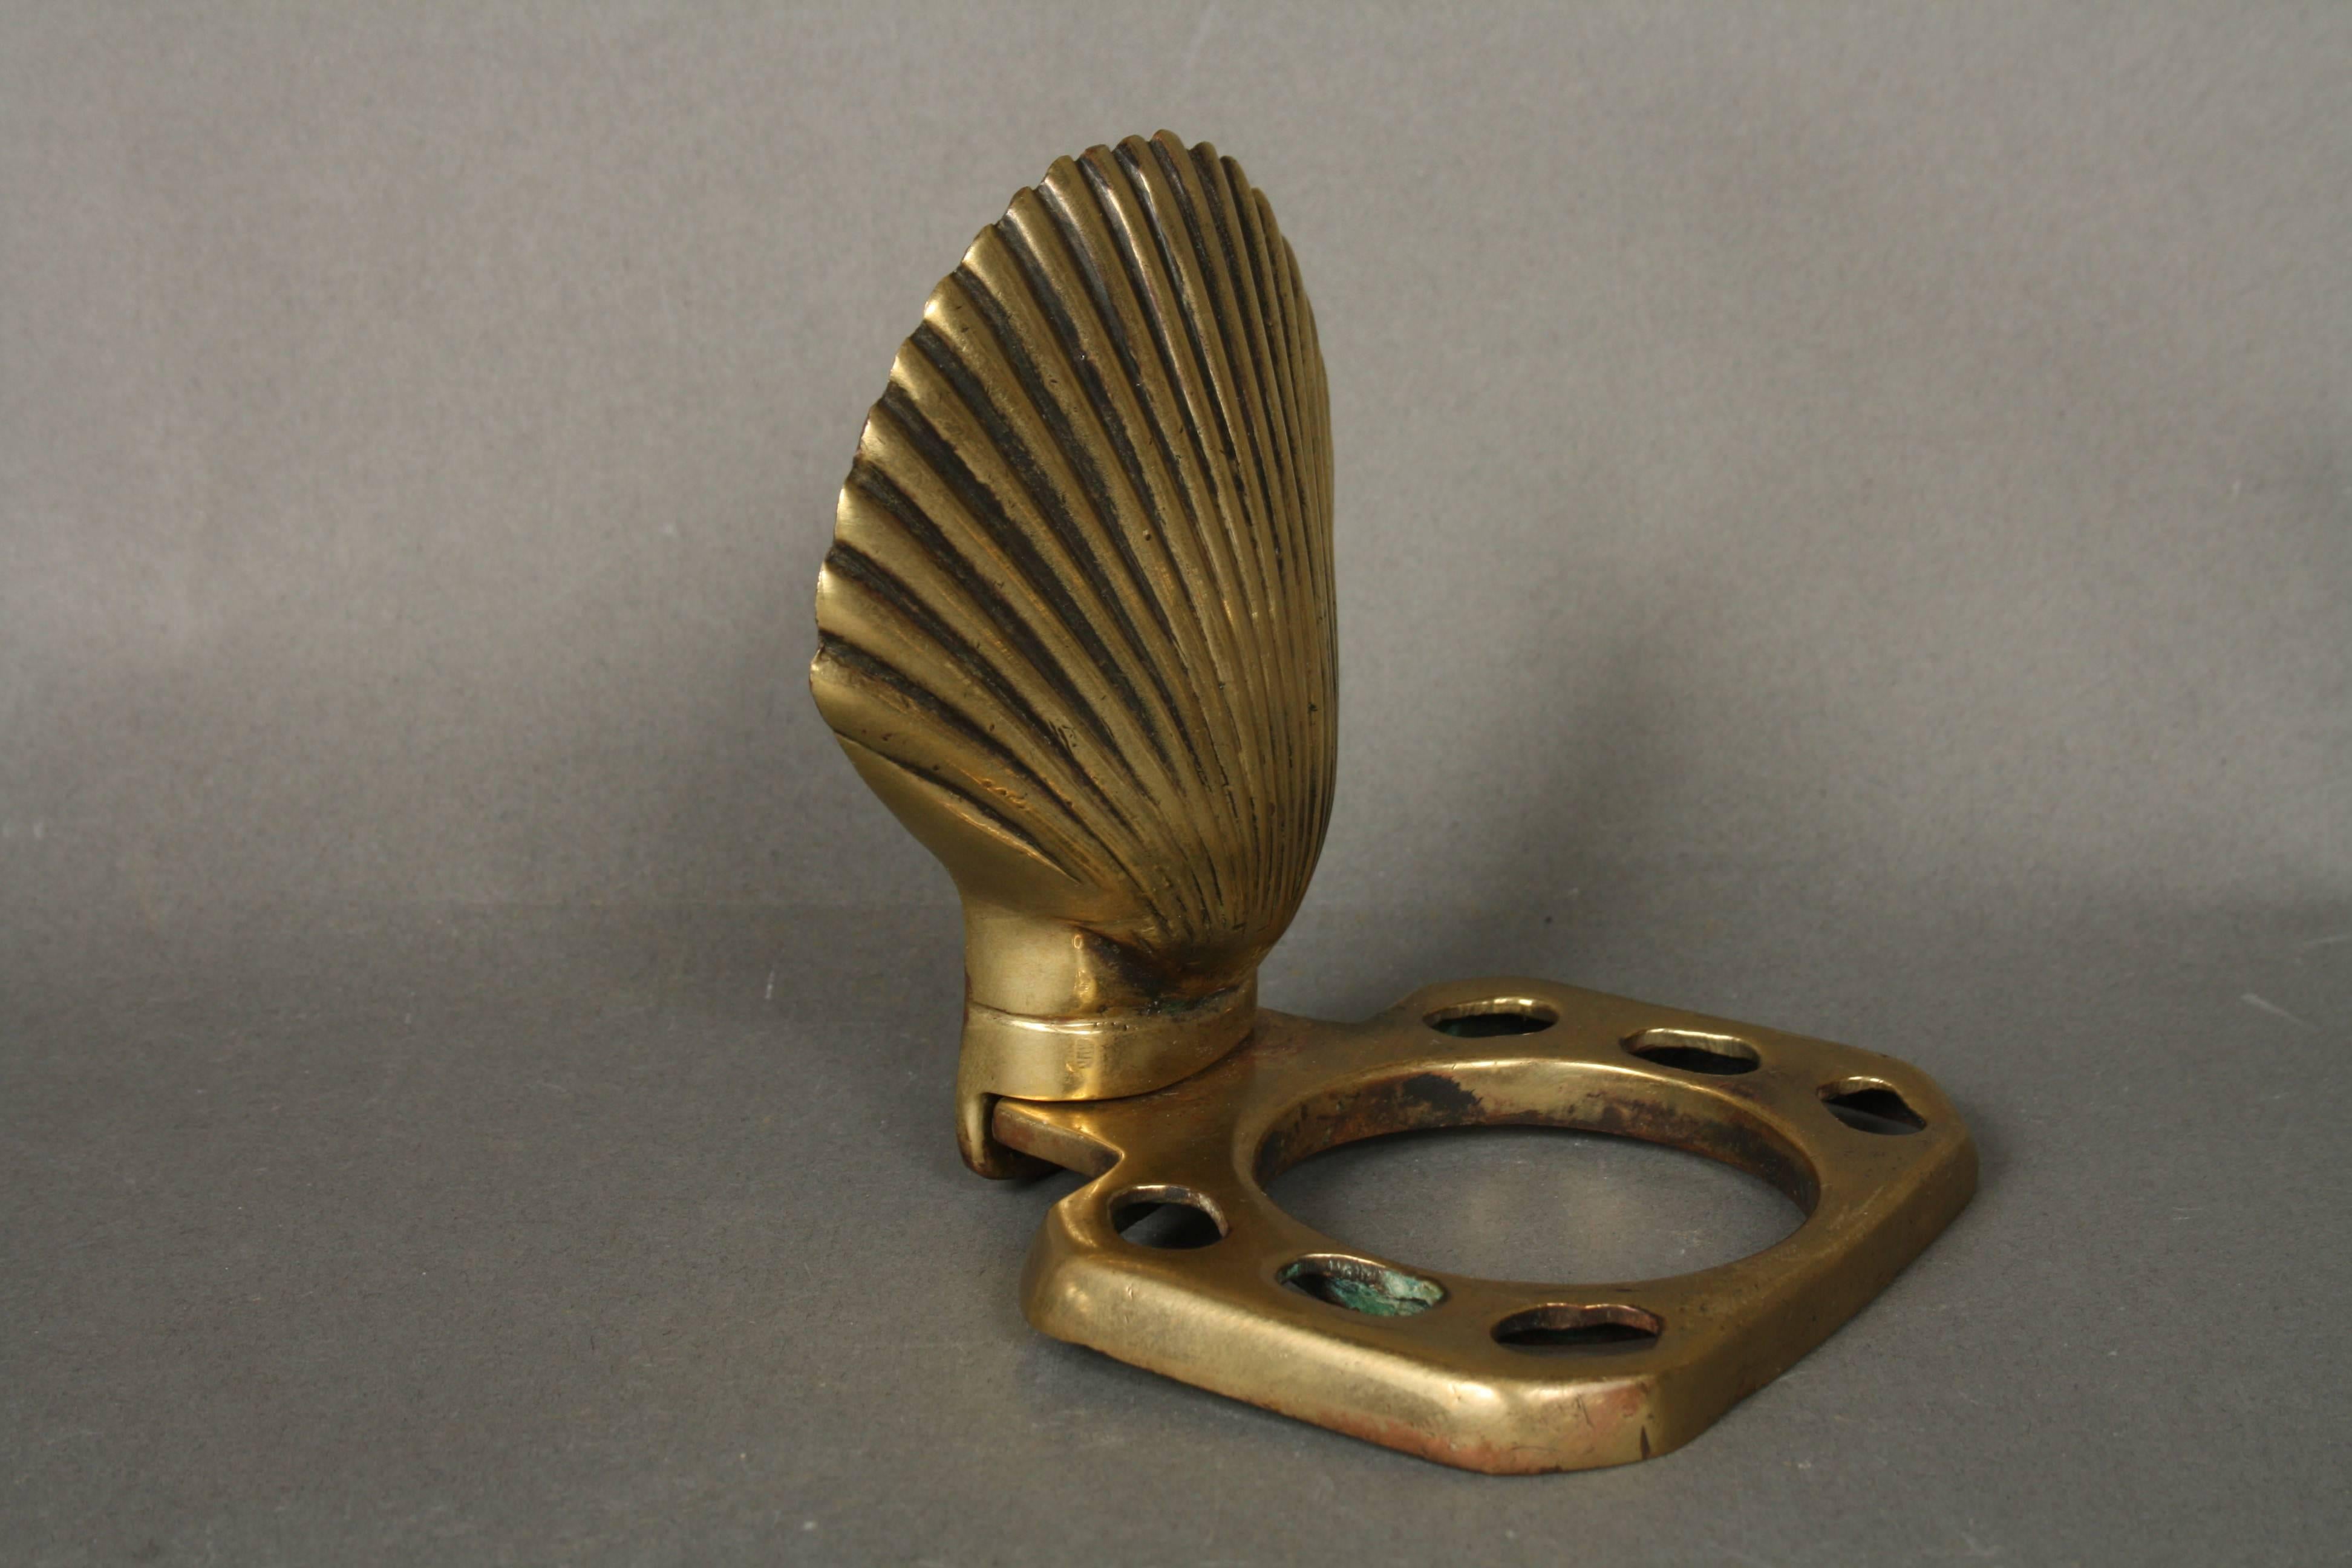 Mid-20th Century Shell Shaped Soap Dish and Toothbrush Holder, Brass, 1950s For Sale